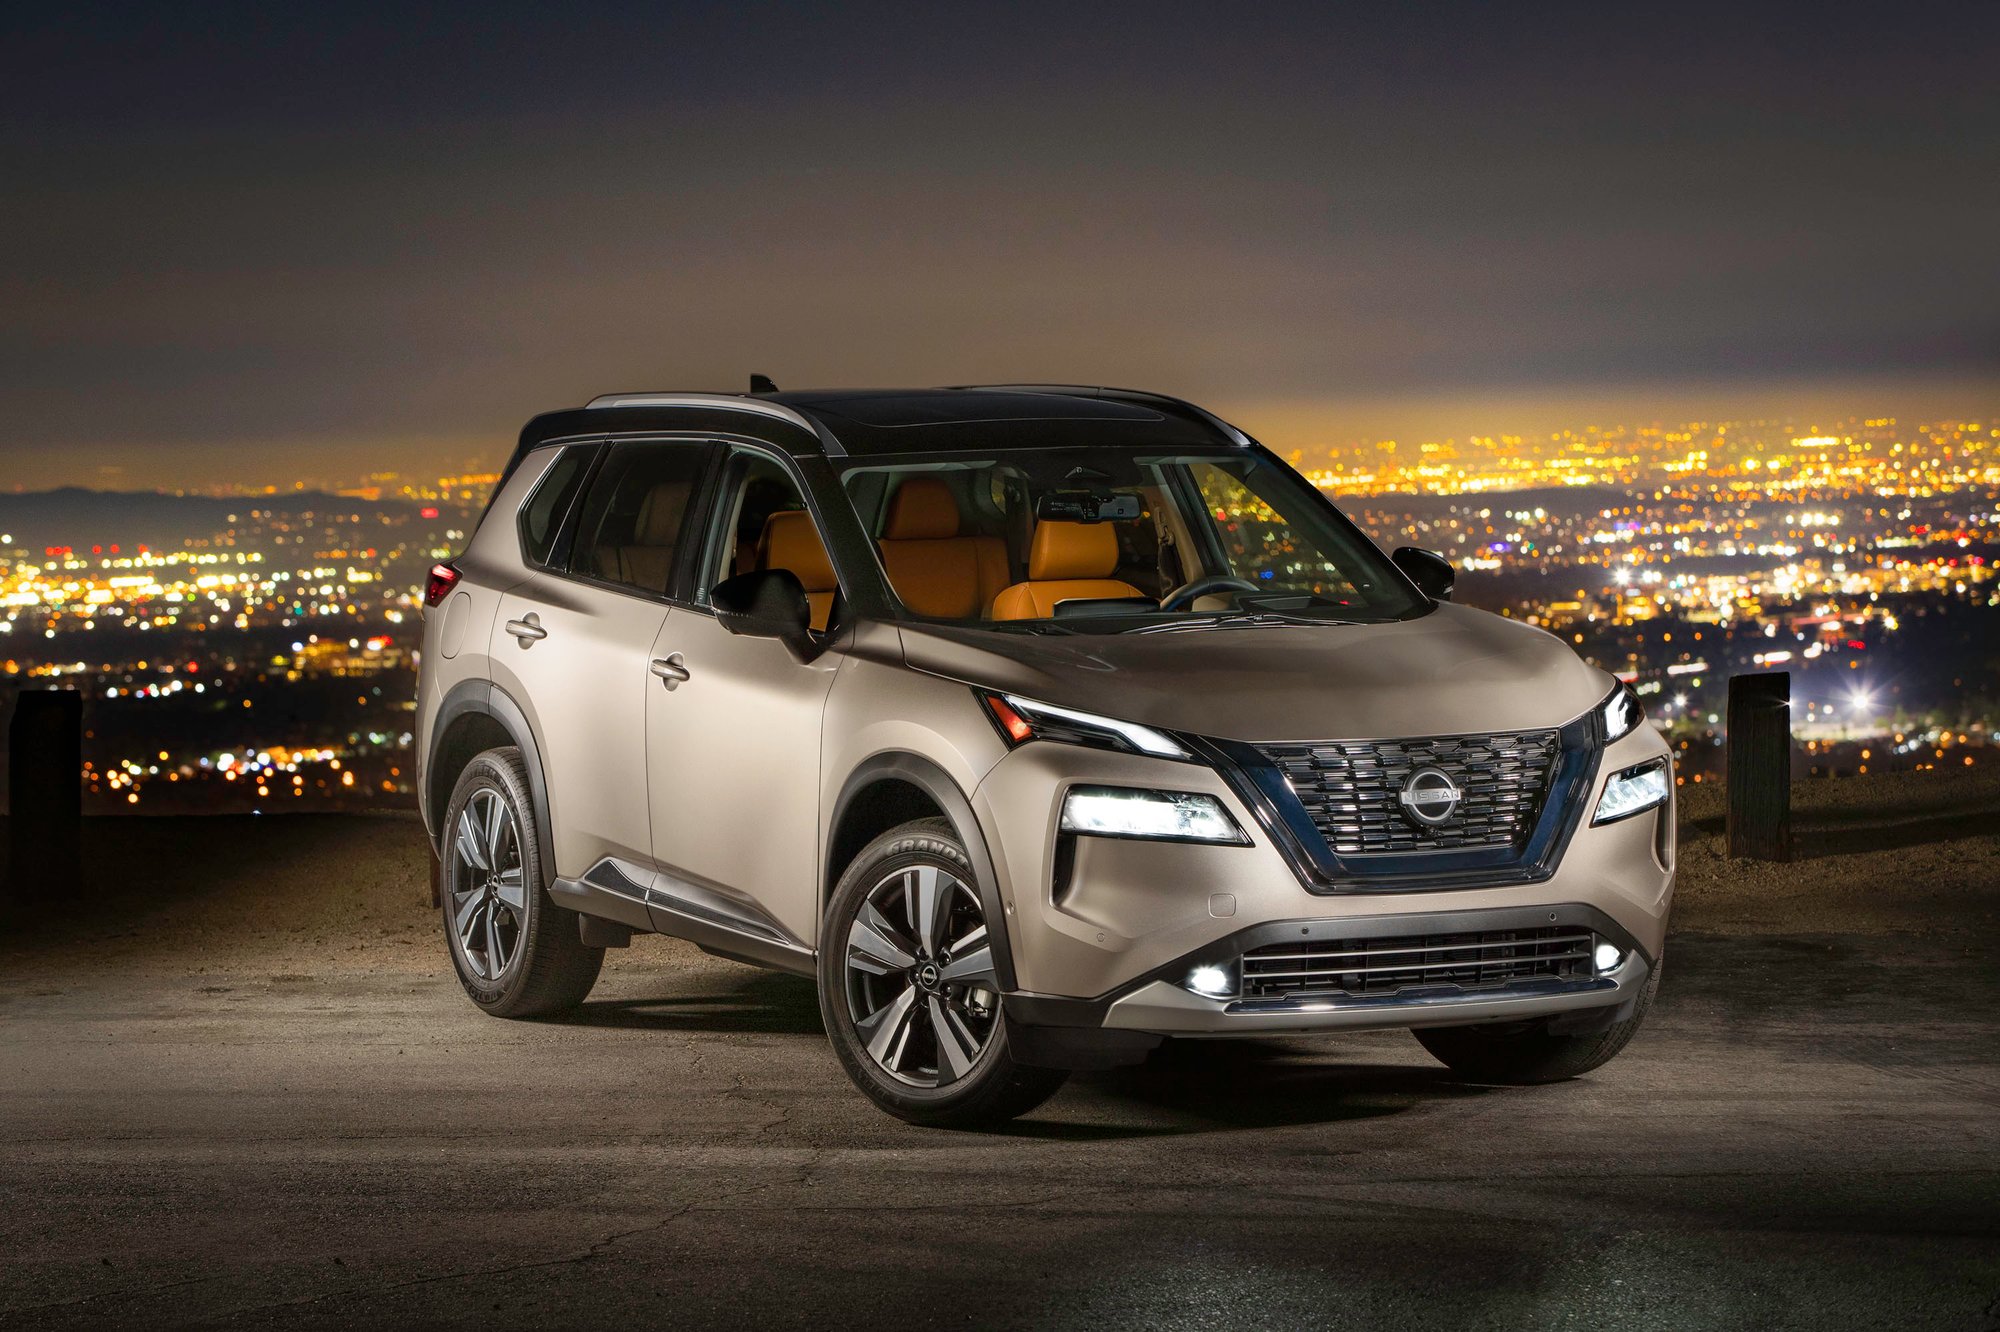 2022 Nissan Rogue Gets More Power With New VCTurbo Engine